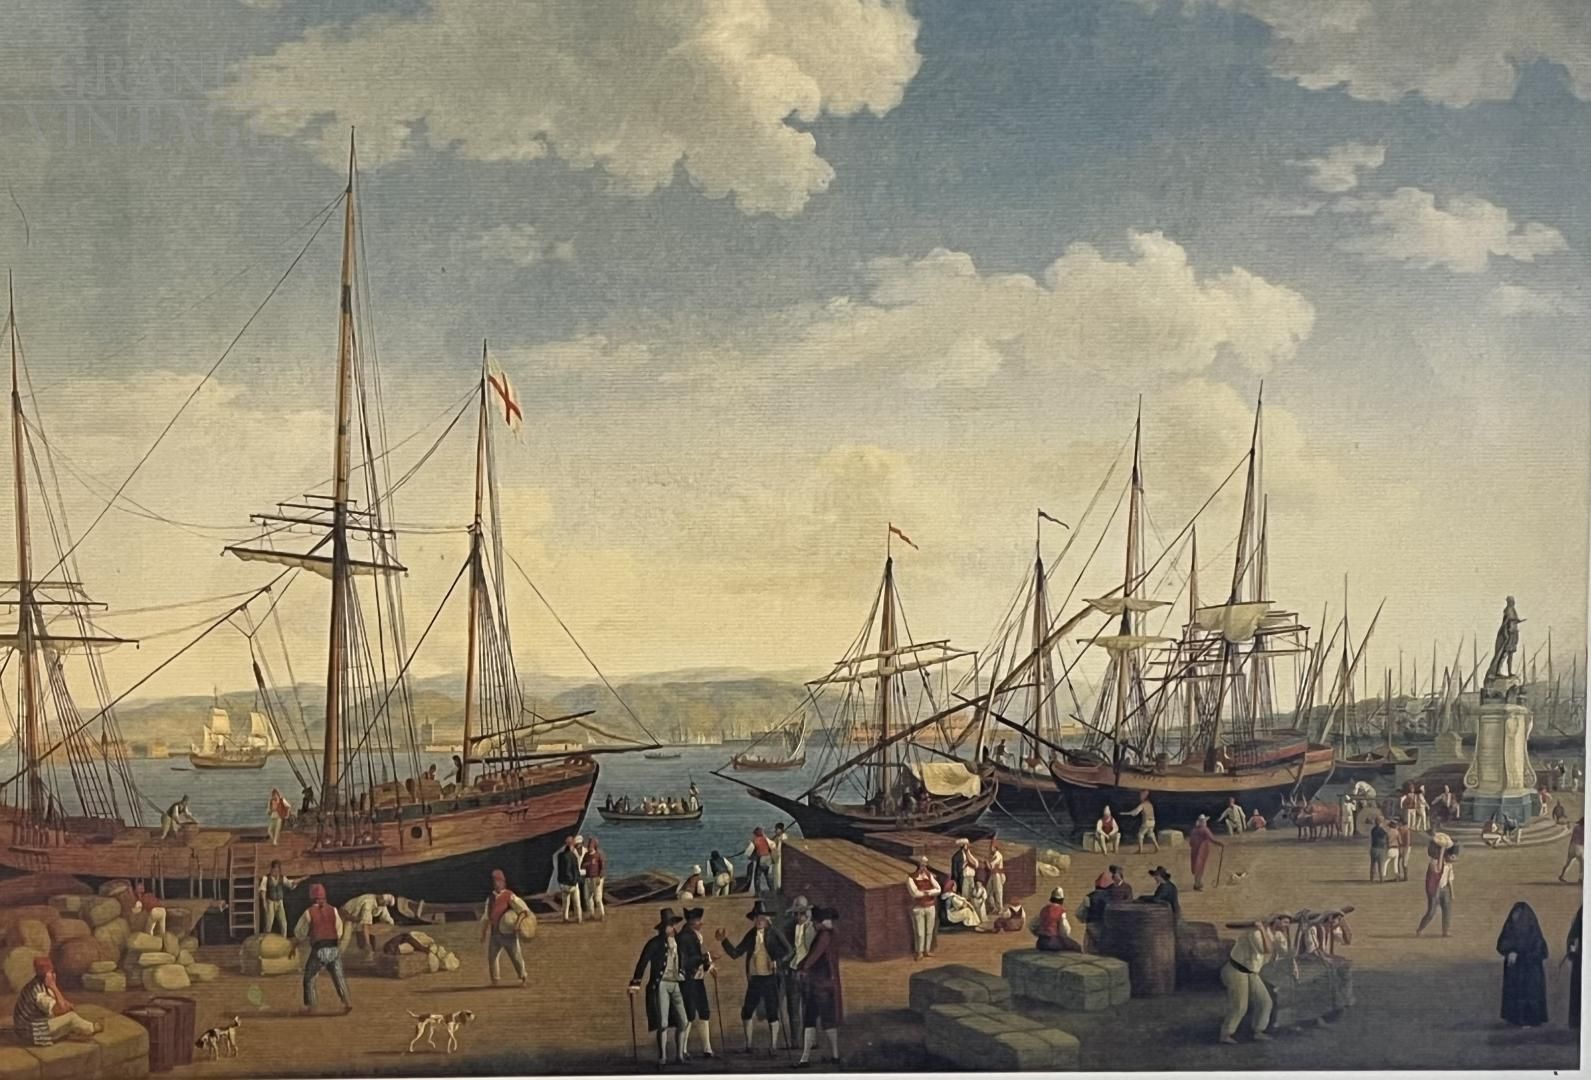 Color print with a view of the port of Messina in the 18th century